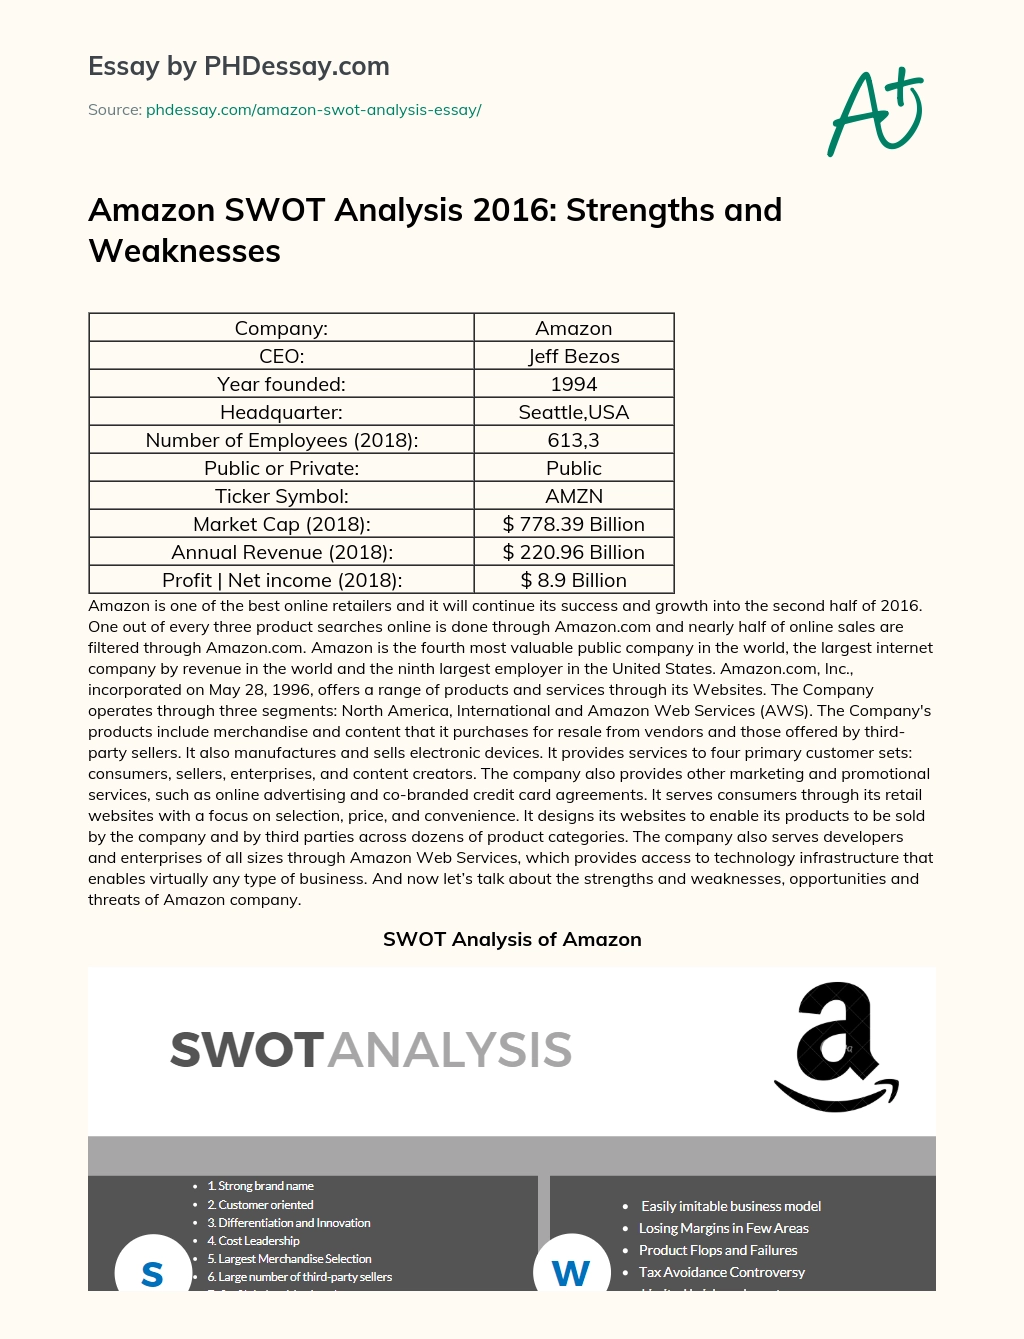 Amazon SWOT Analysis 2016: Strengths and Weaknesses essay